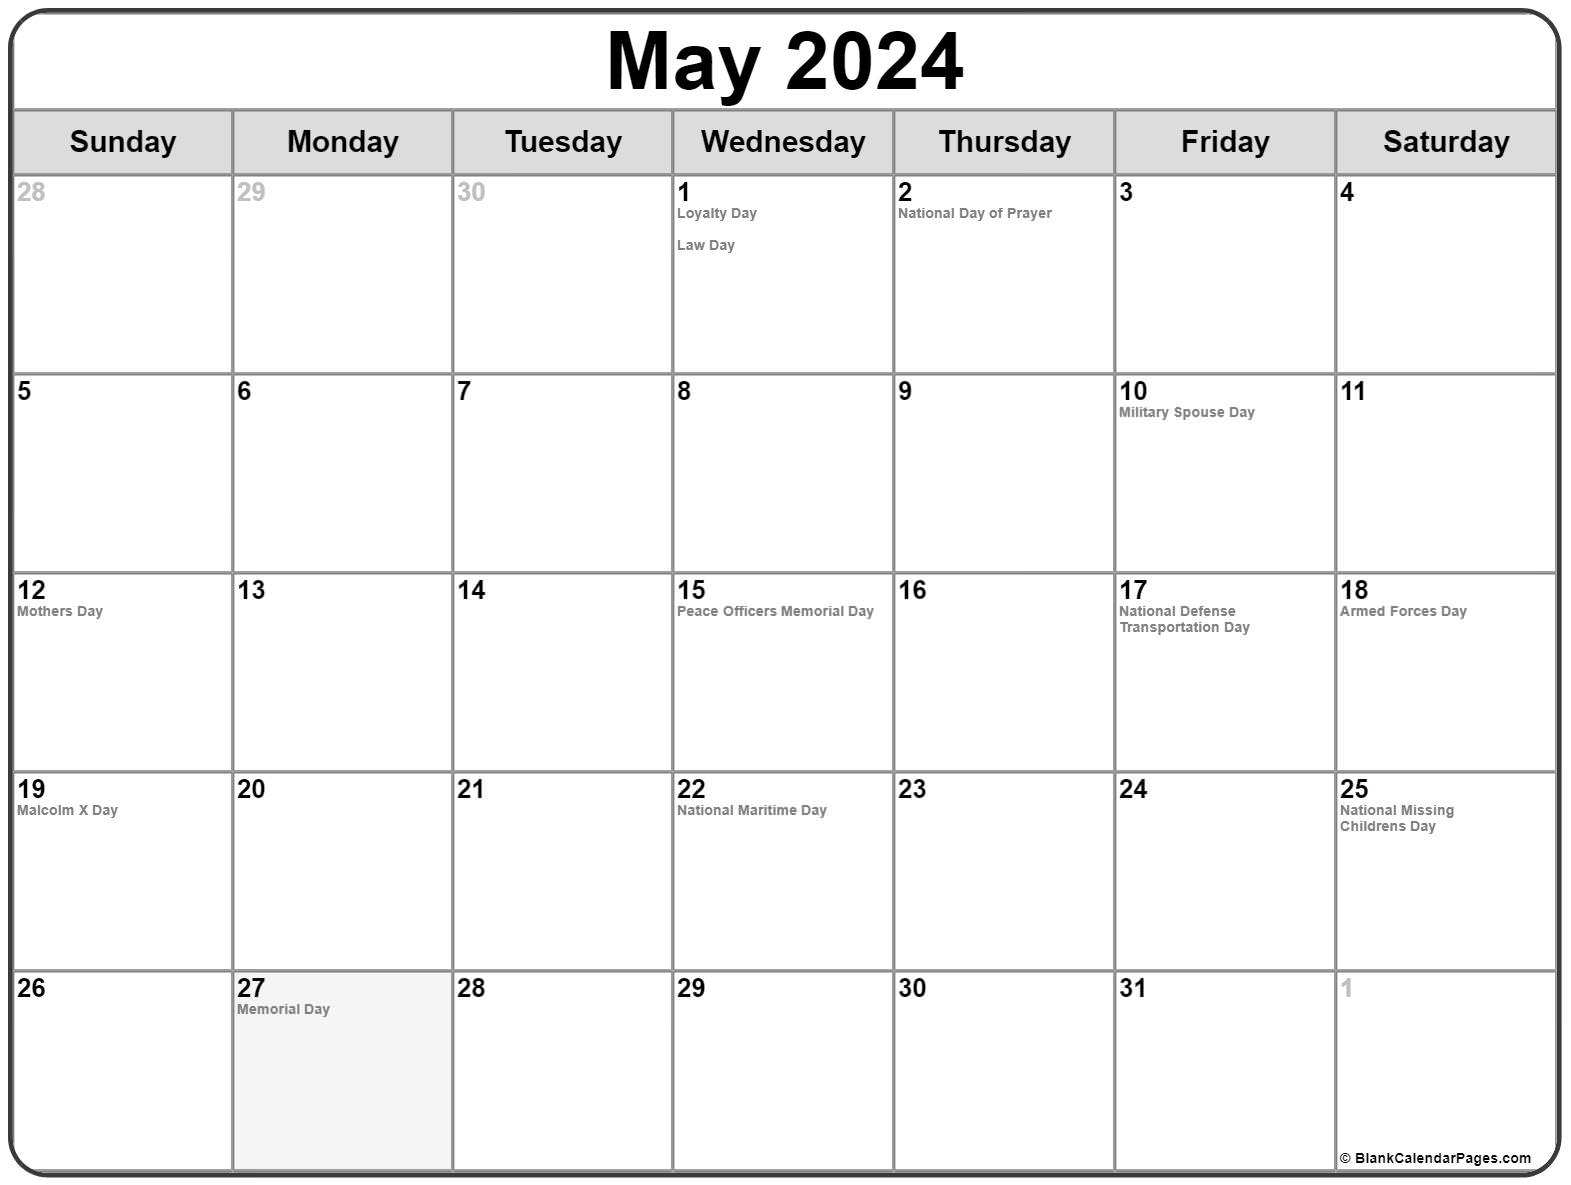 collection-of-may-2020-calendars-with-holidays